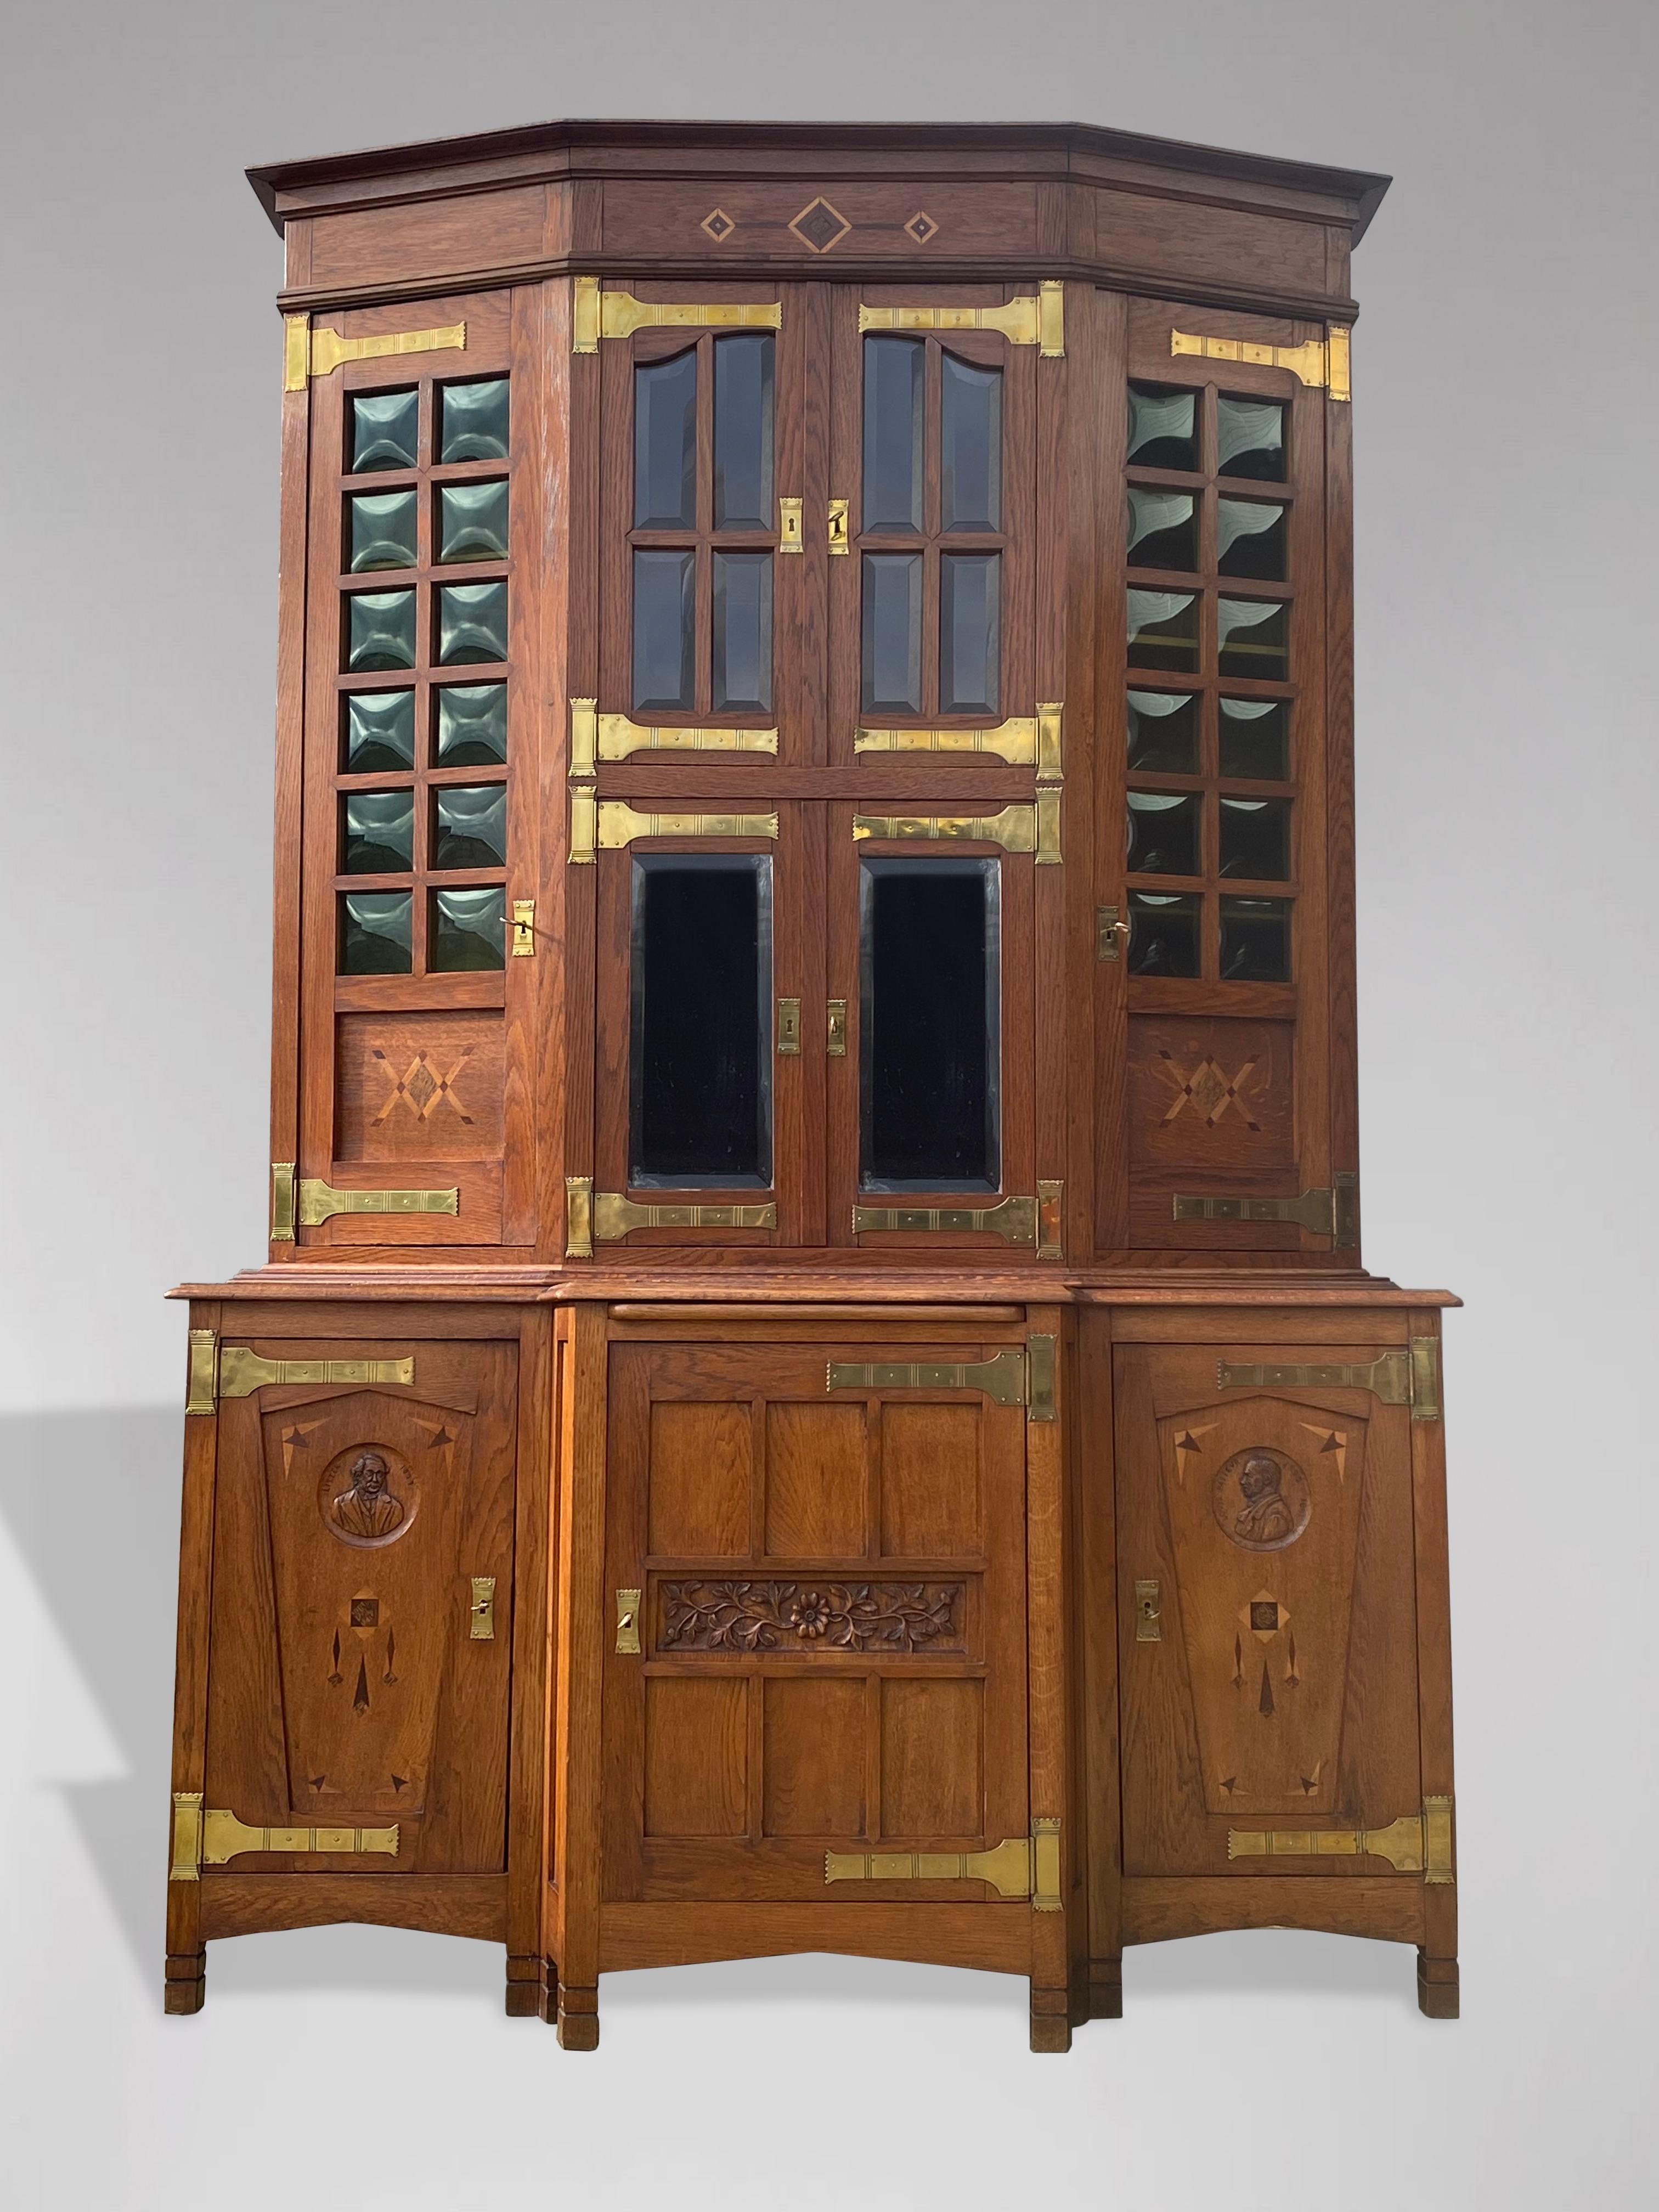 A magnificent and rare oak Arts & Crafts, Art Nouveau buffet or sideboard, in the style of Gustave SERRURIER BOVY (1858-1910). Solid oak, with original well shaped brass hinges, original bevelled green glass and bevelled mirrors, rosewood and